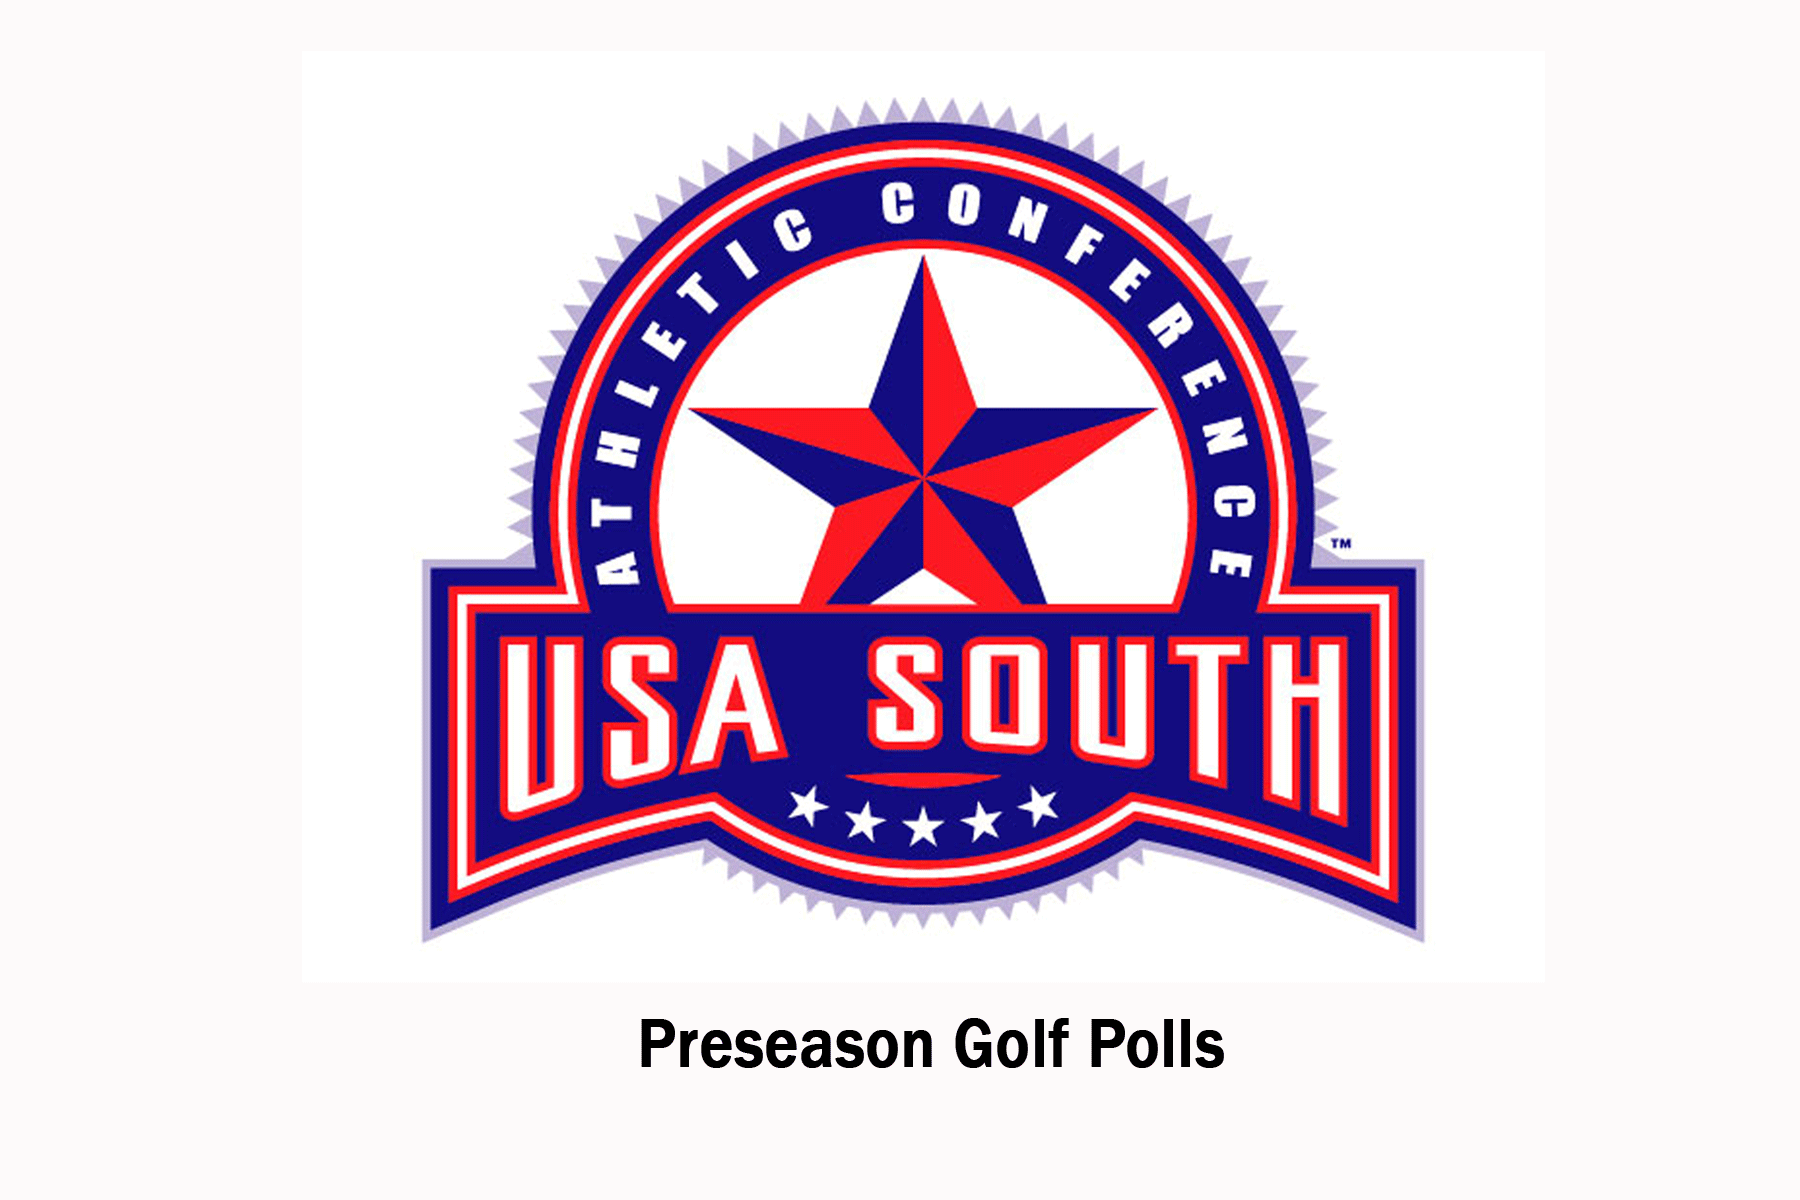 Men’s golf ranked first, women’s golf second in USA South preseason poll